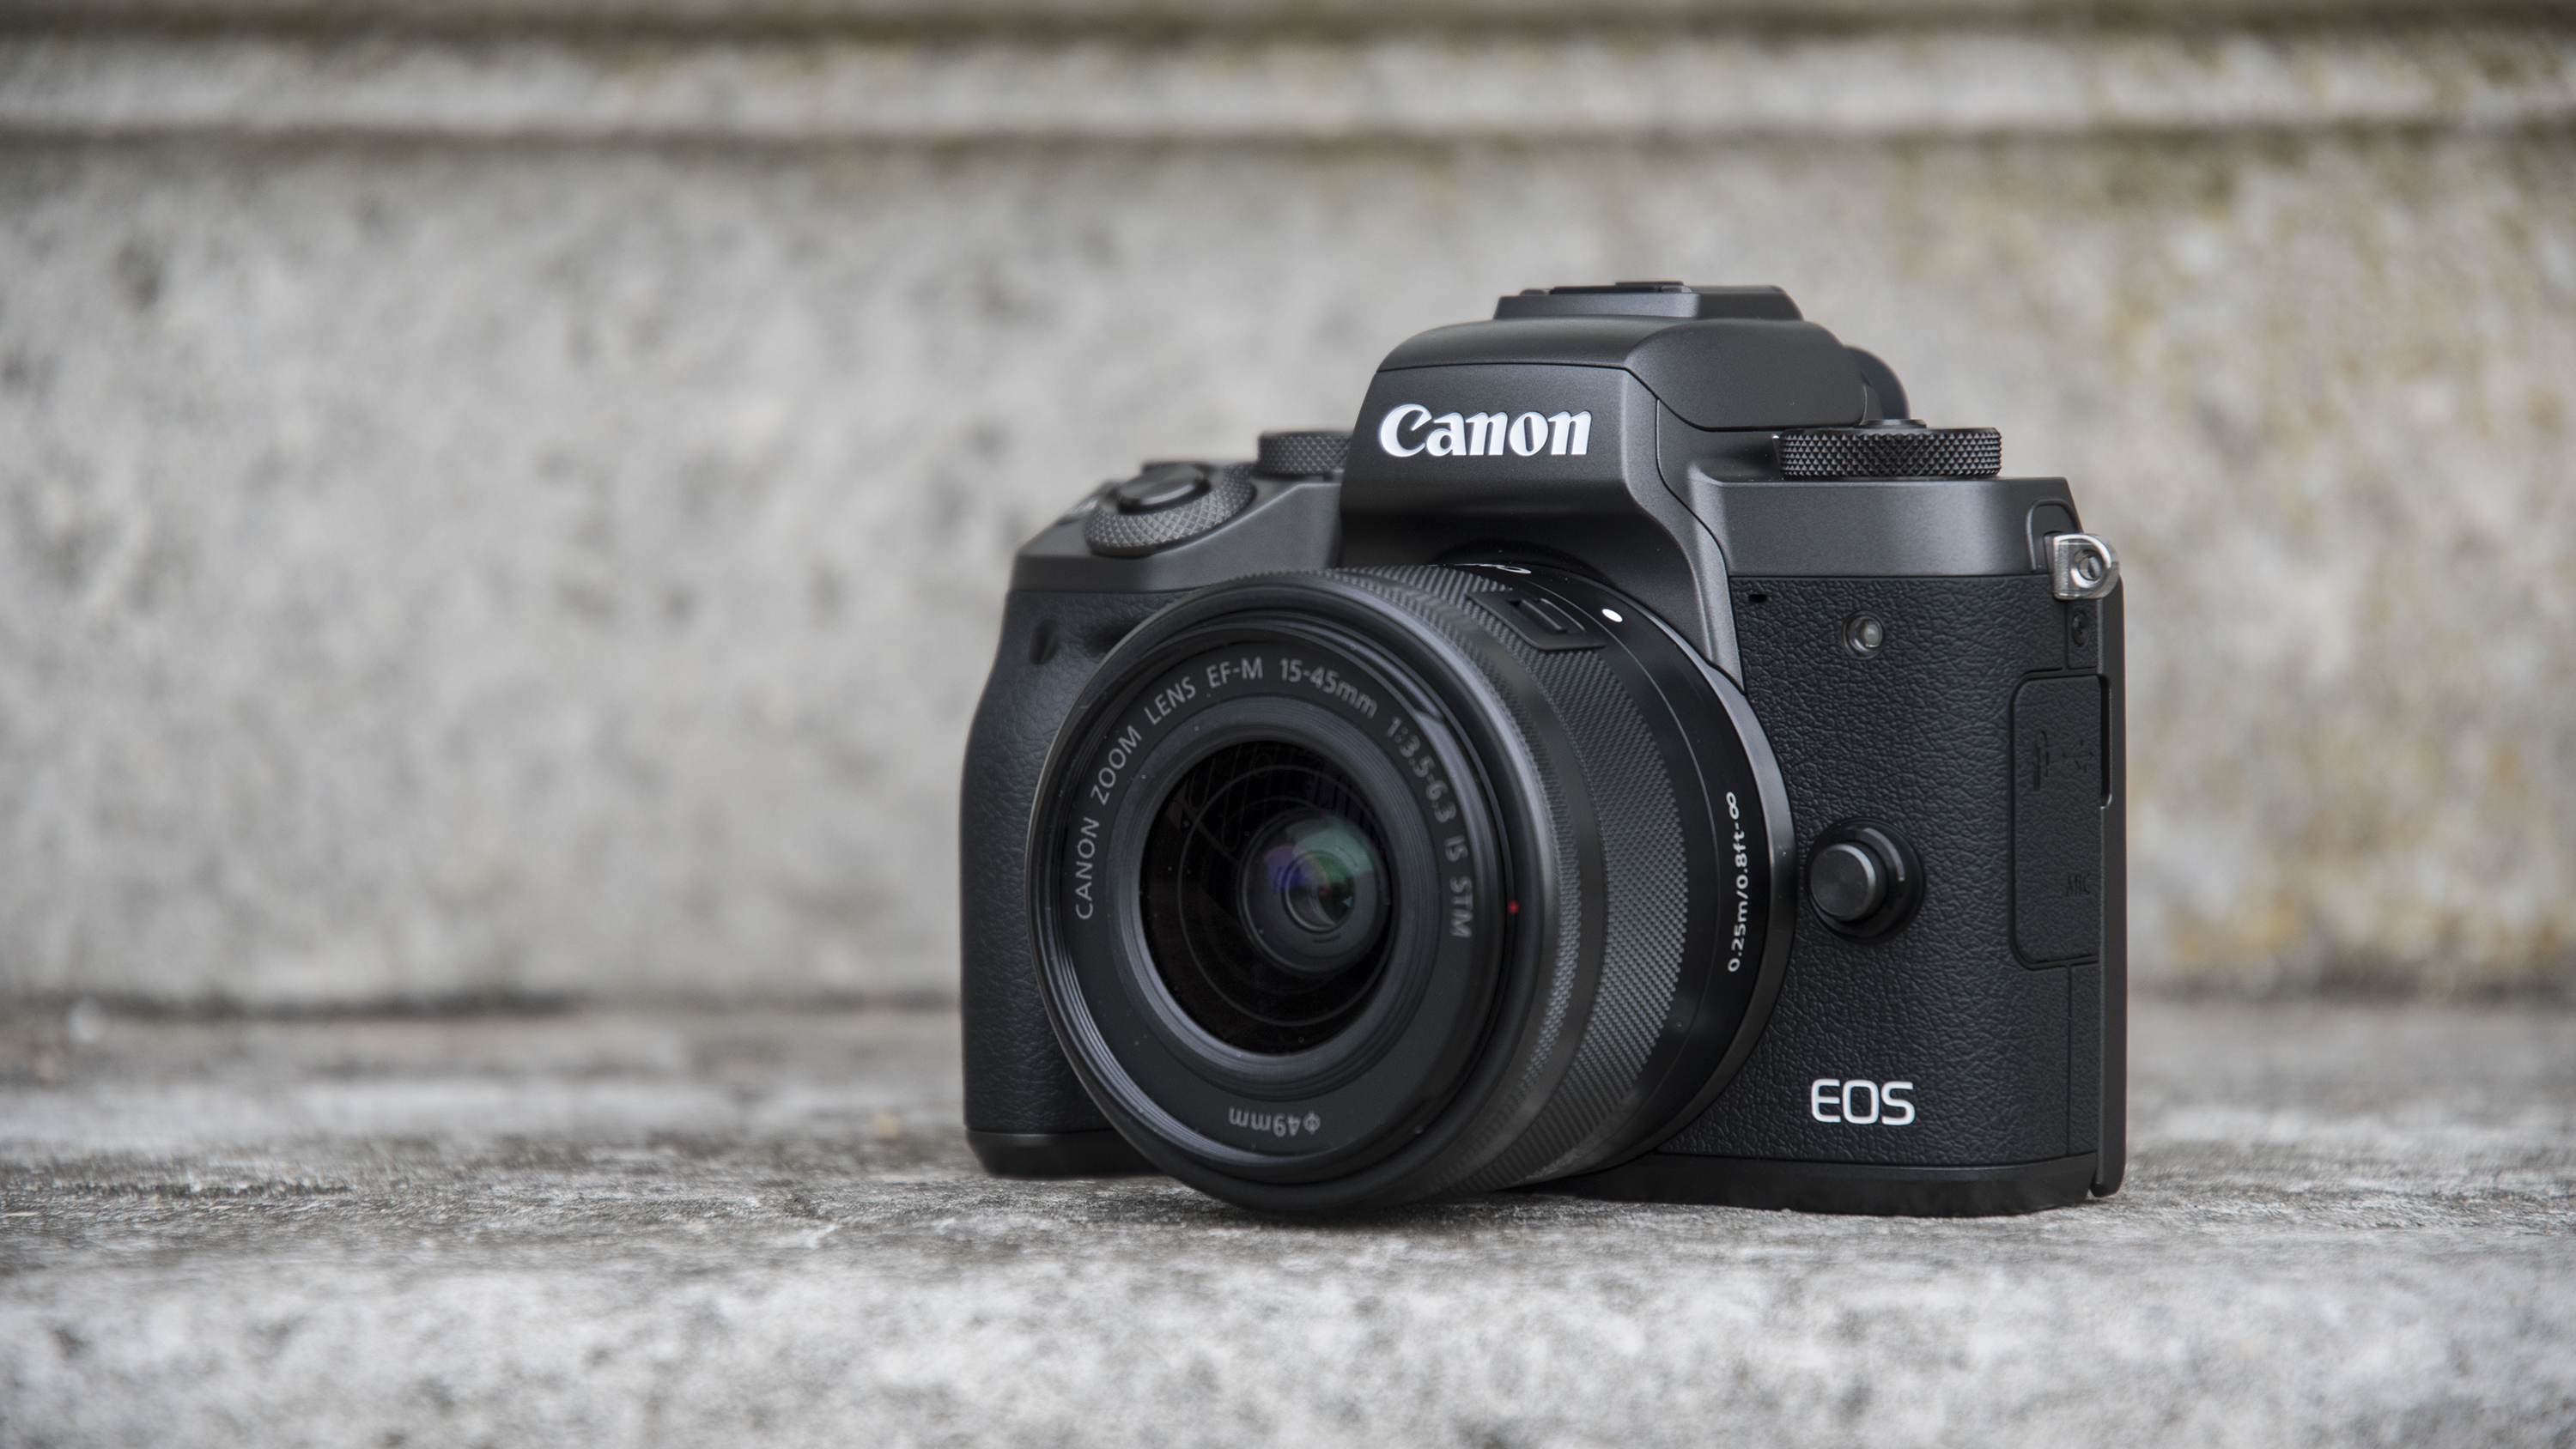 Canon EOS M5 Mark II rumored to launch alongside the EOS M6 Mark II |